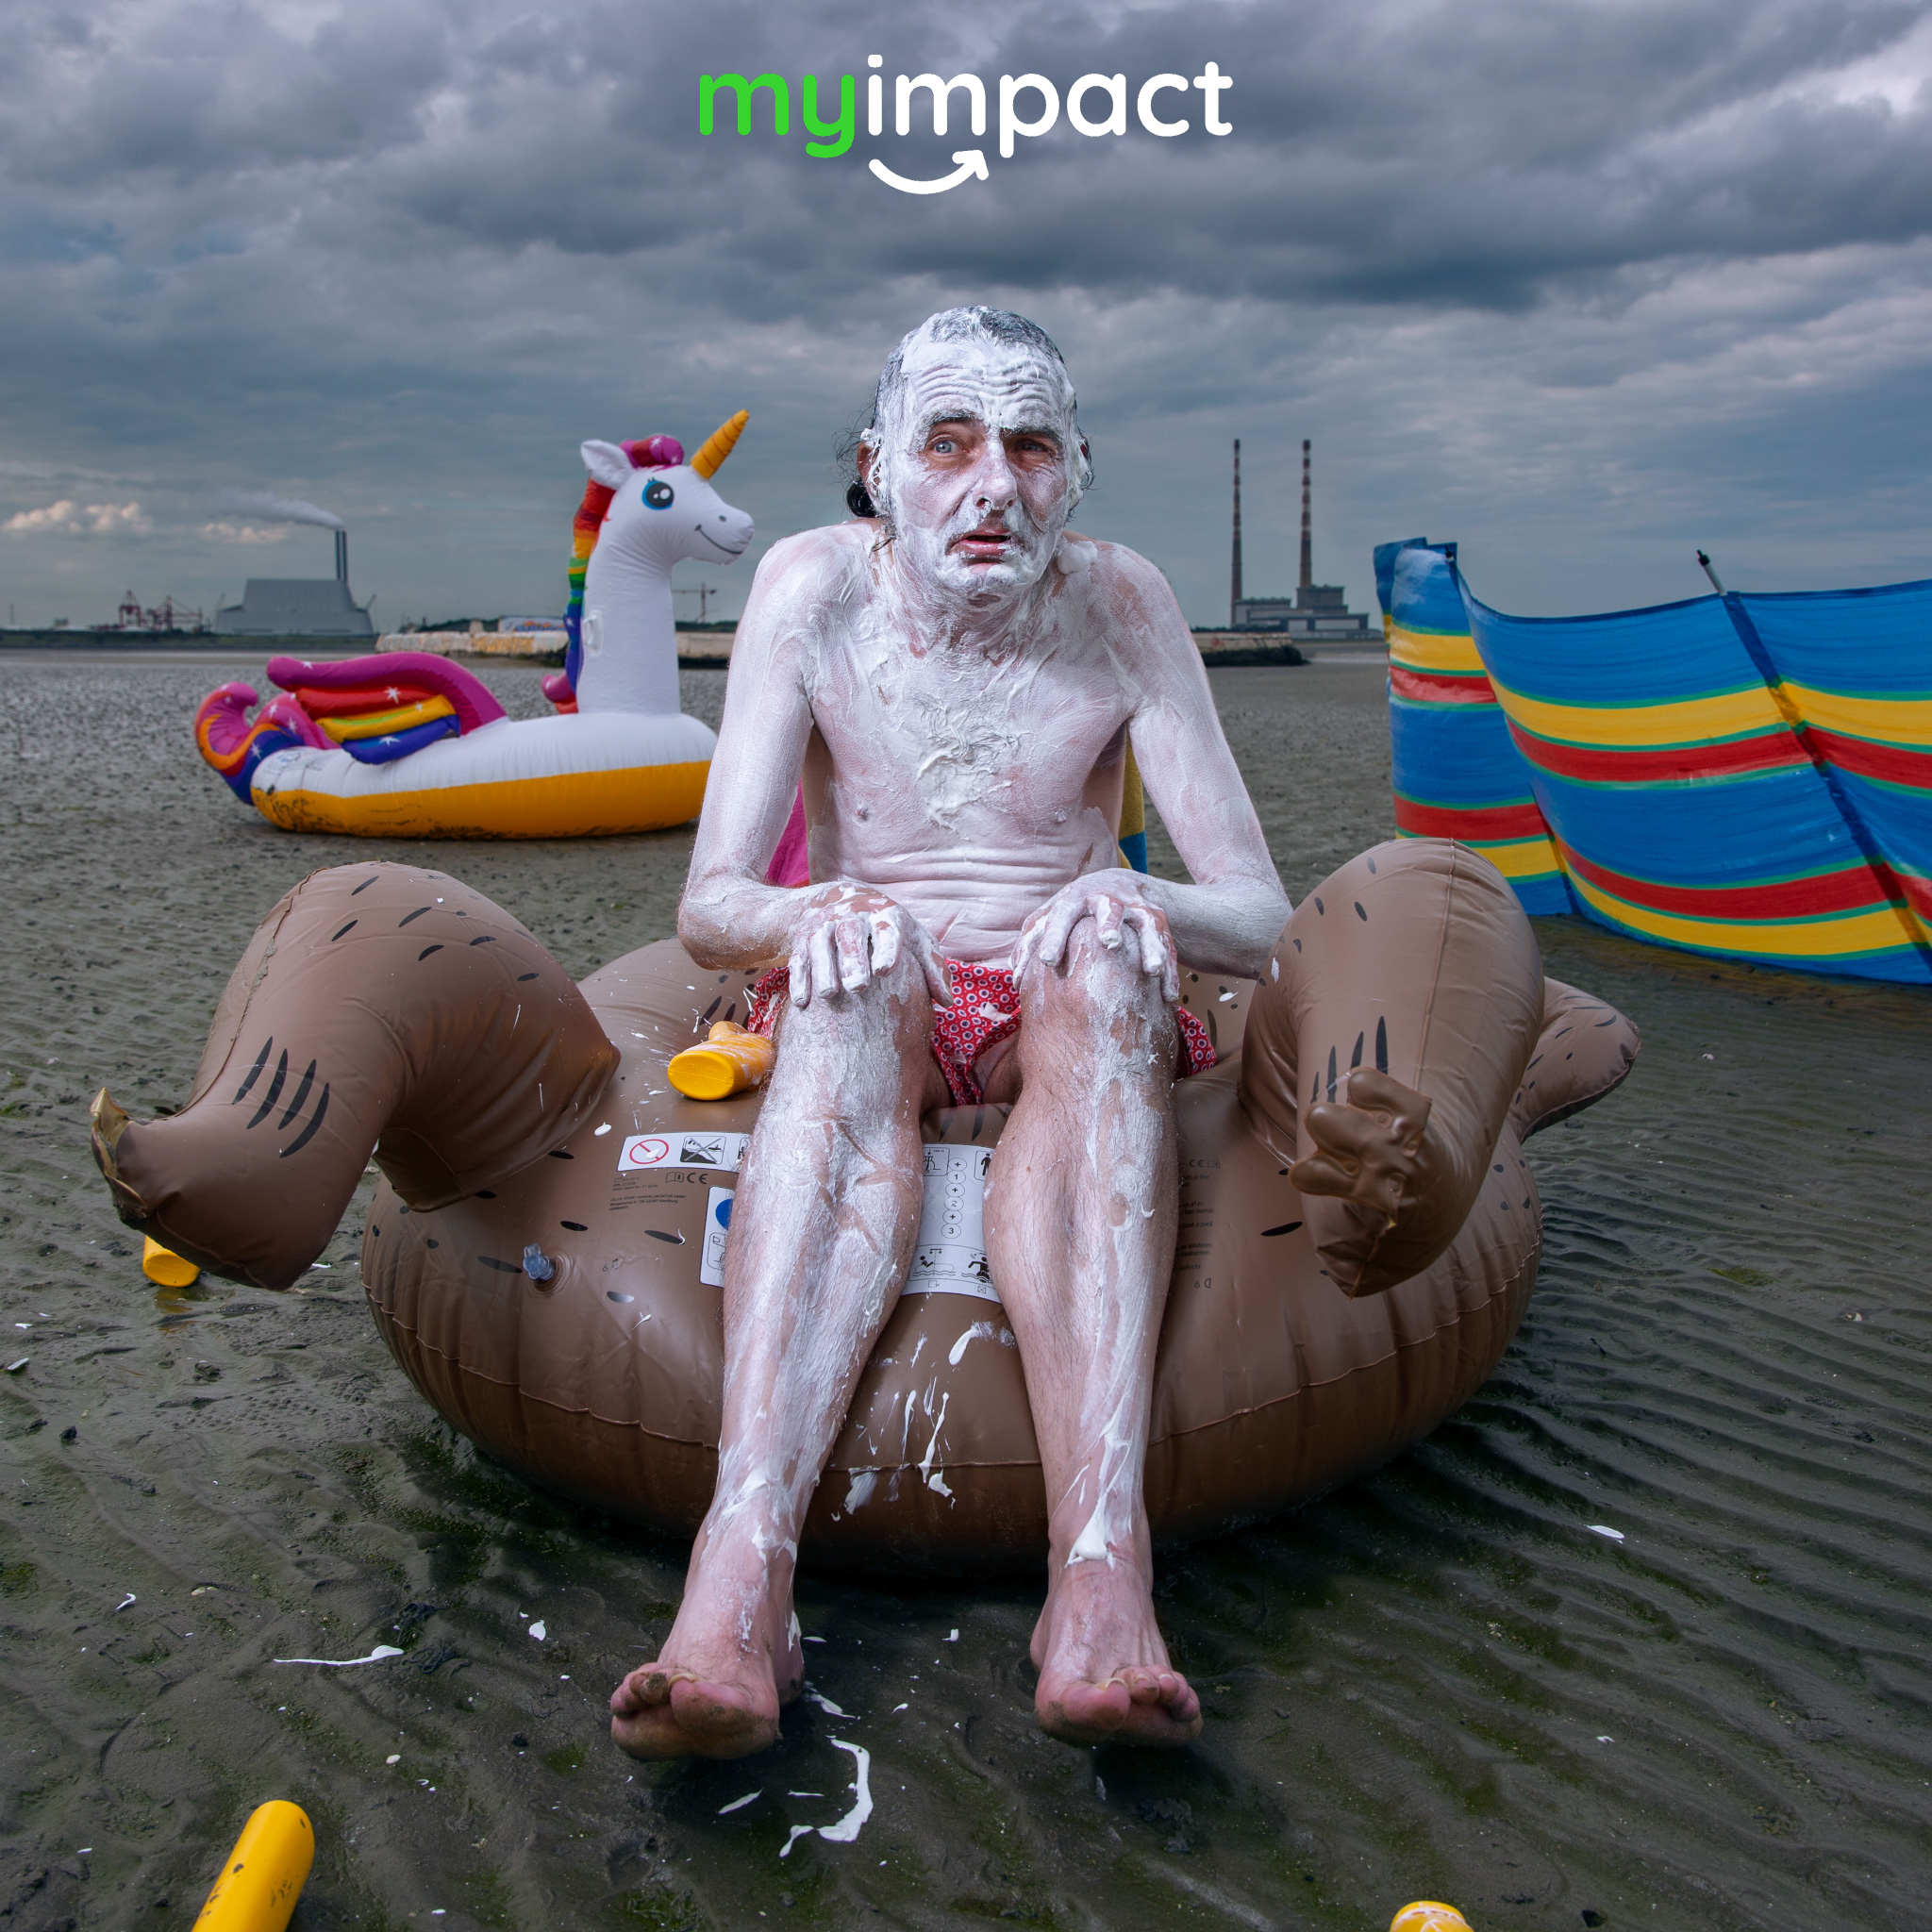 New ‘MyImpact’ App Helps You Reduce Waste To Save The Planet